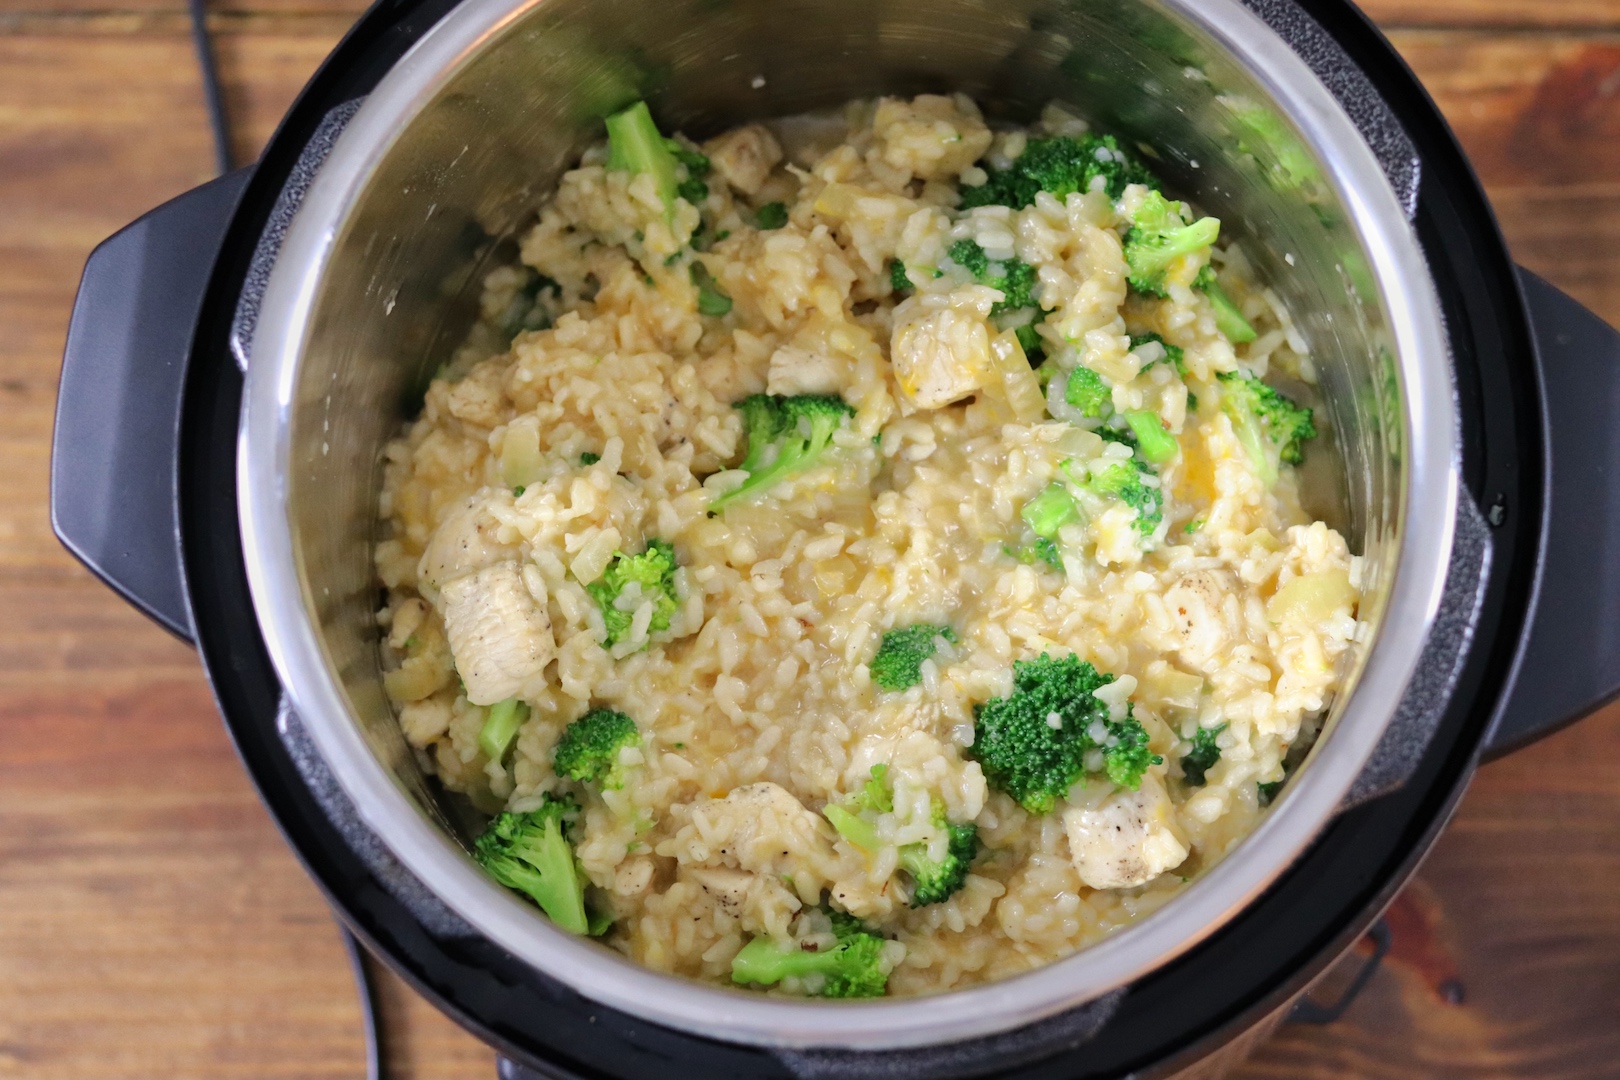 Instant Pot filled with Cheesy Chicken, Broccoli and Rice Recipe